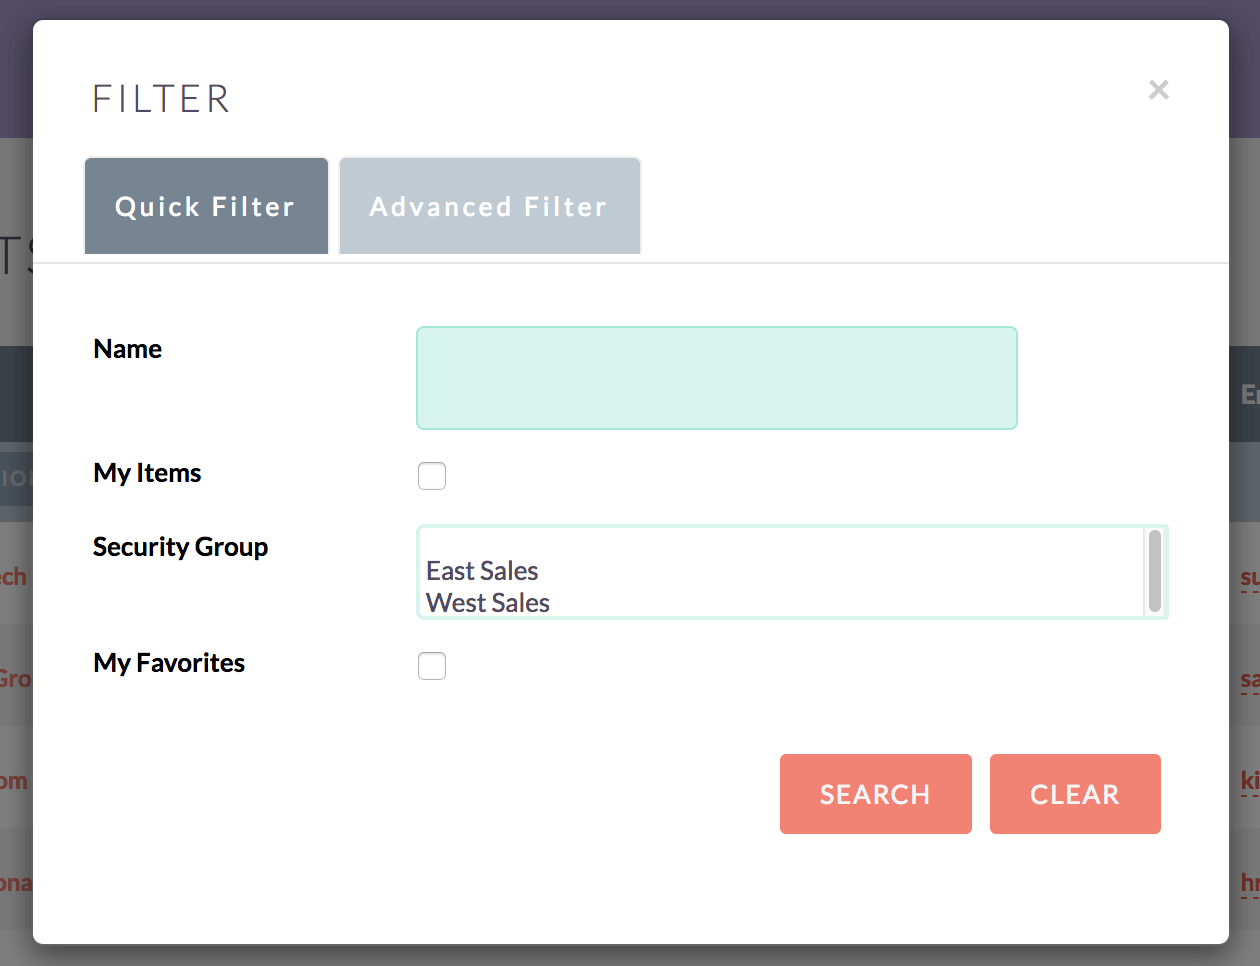 Filter Search by Groups